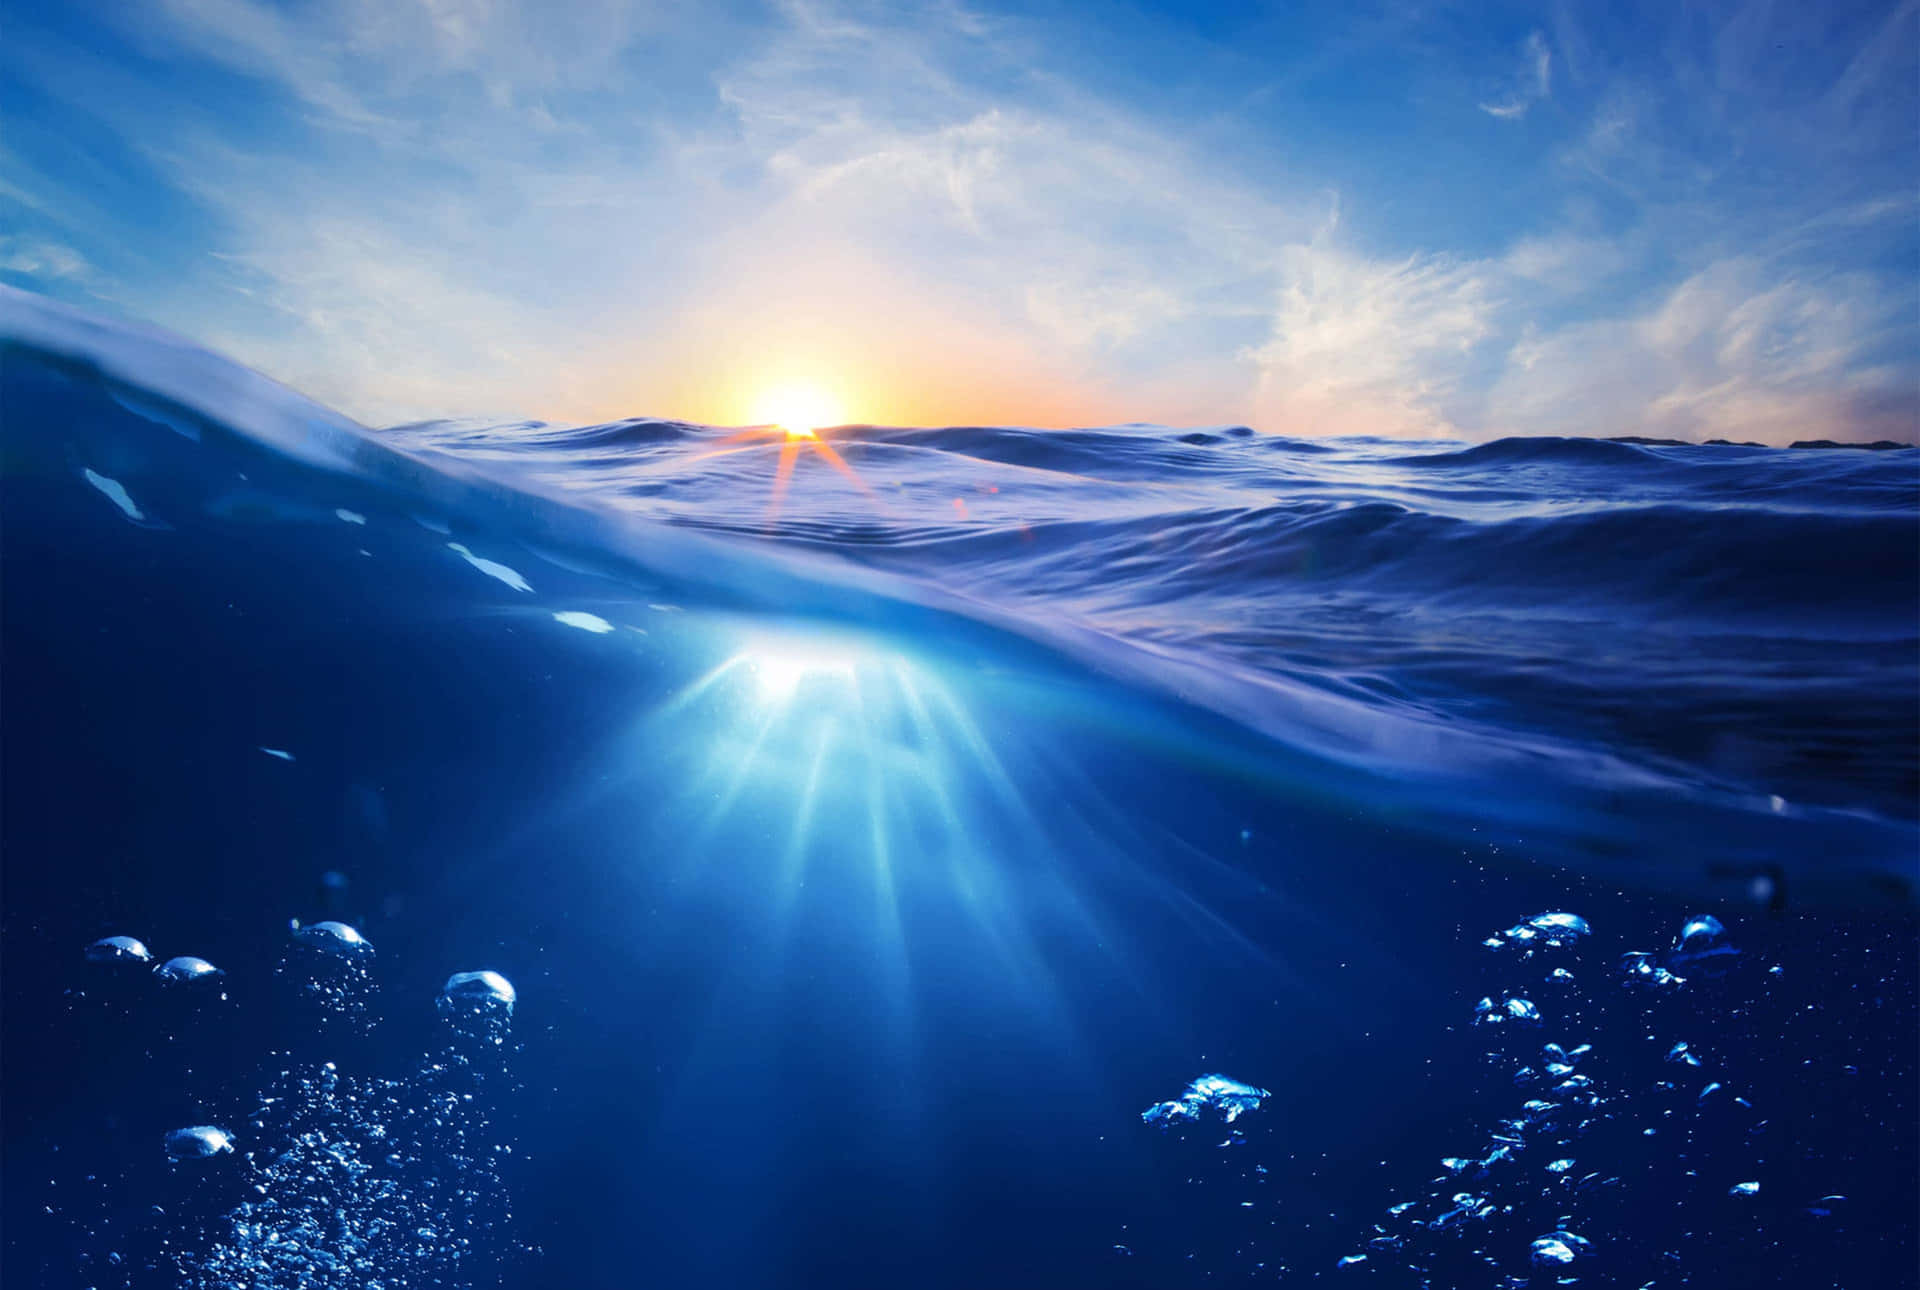 Underwater Ocean With Sun Rising Over The Water